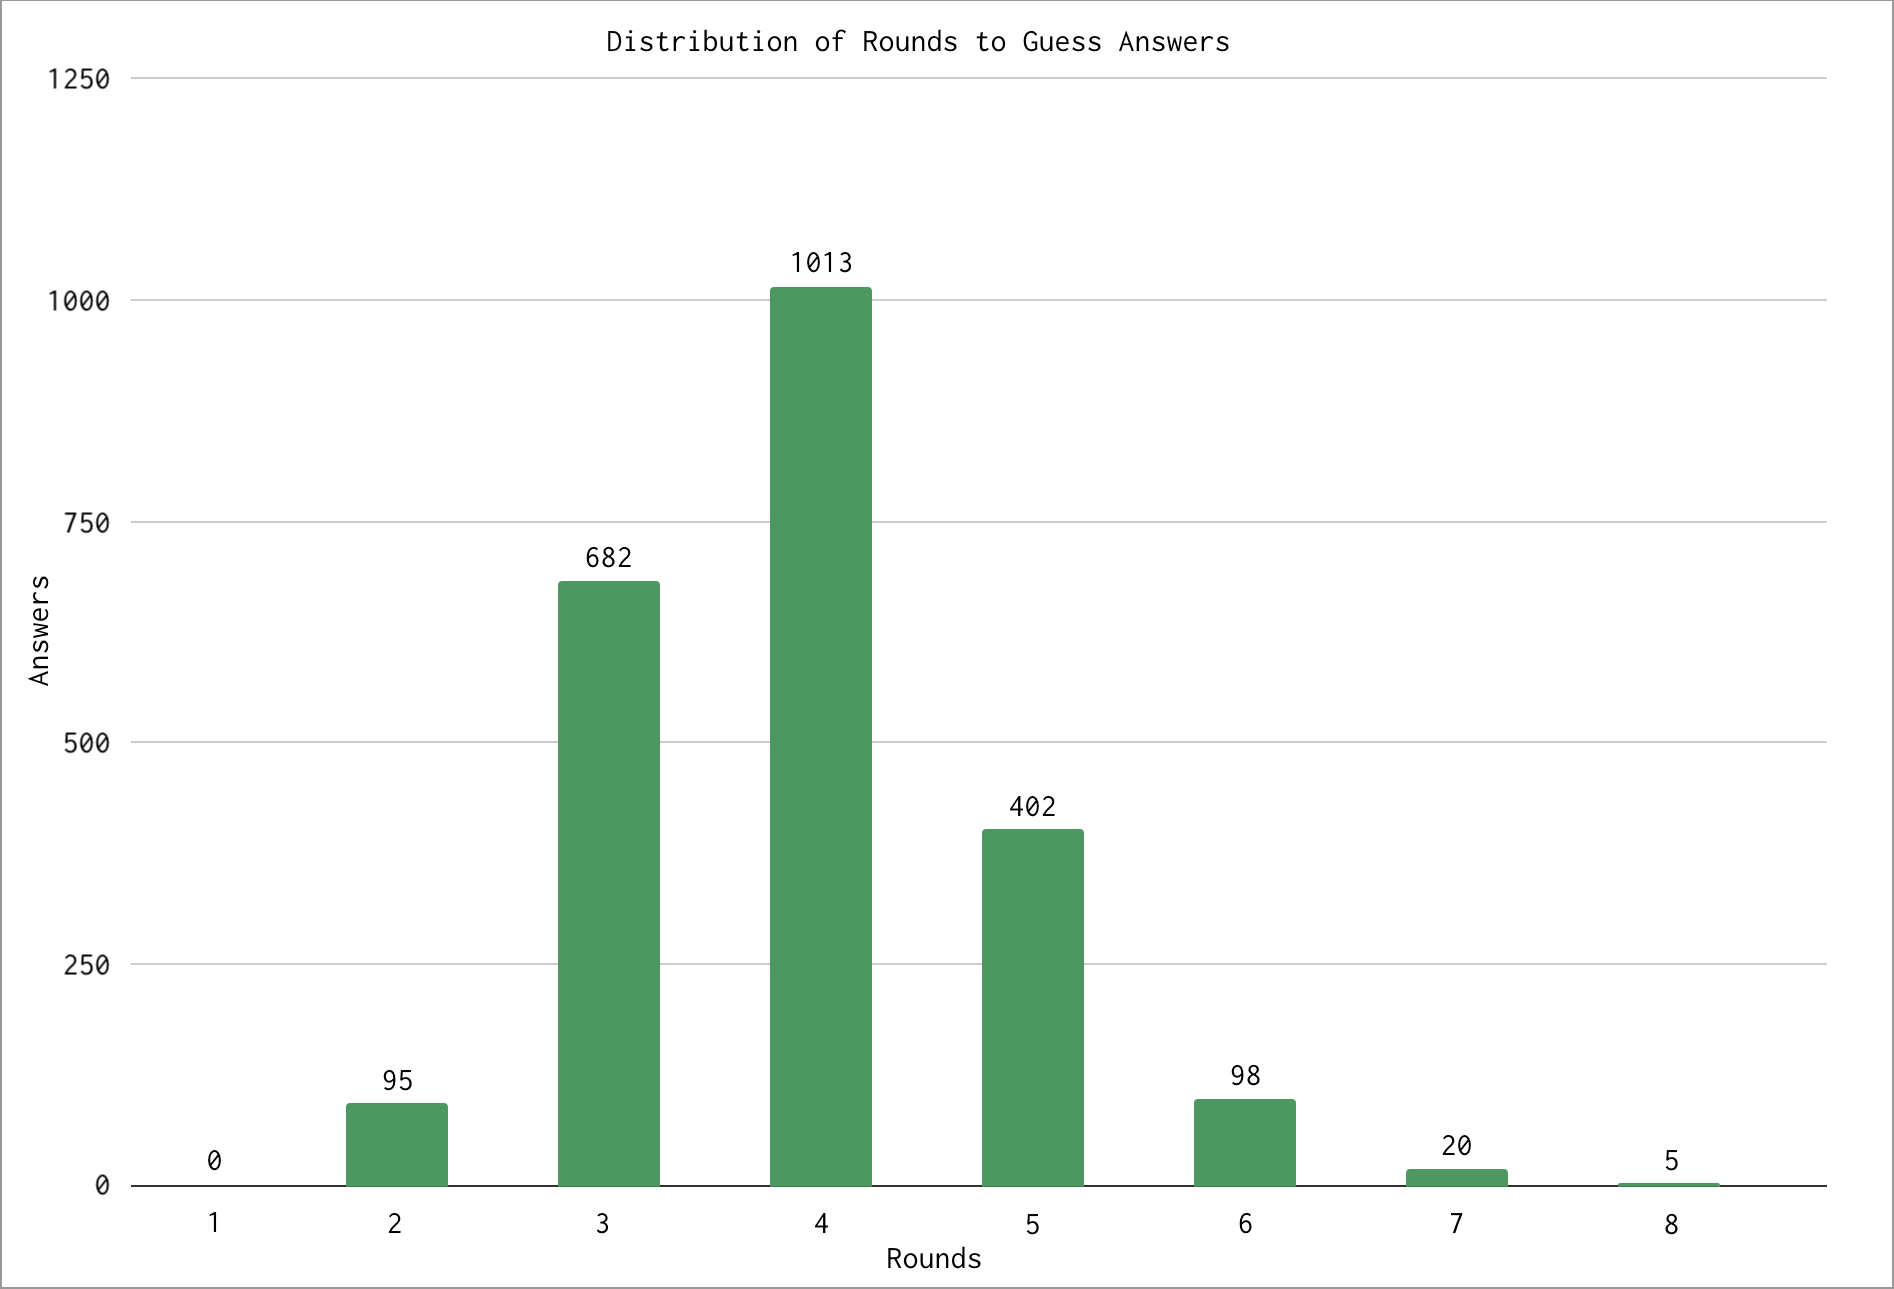 Distribution of rounds required to guess answers